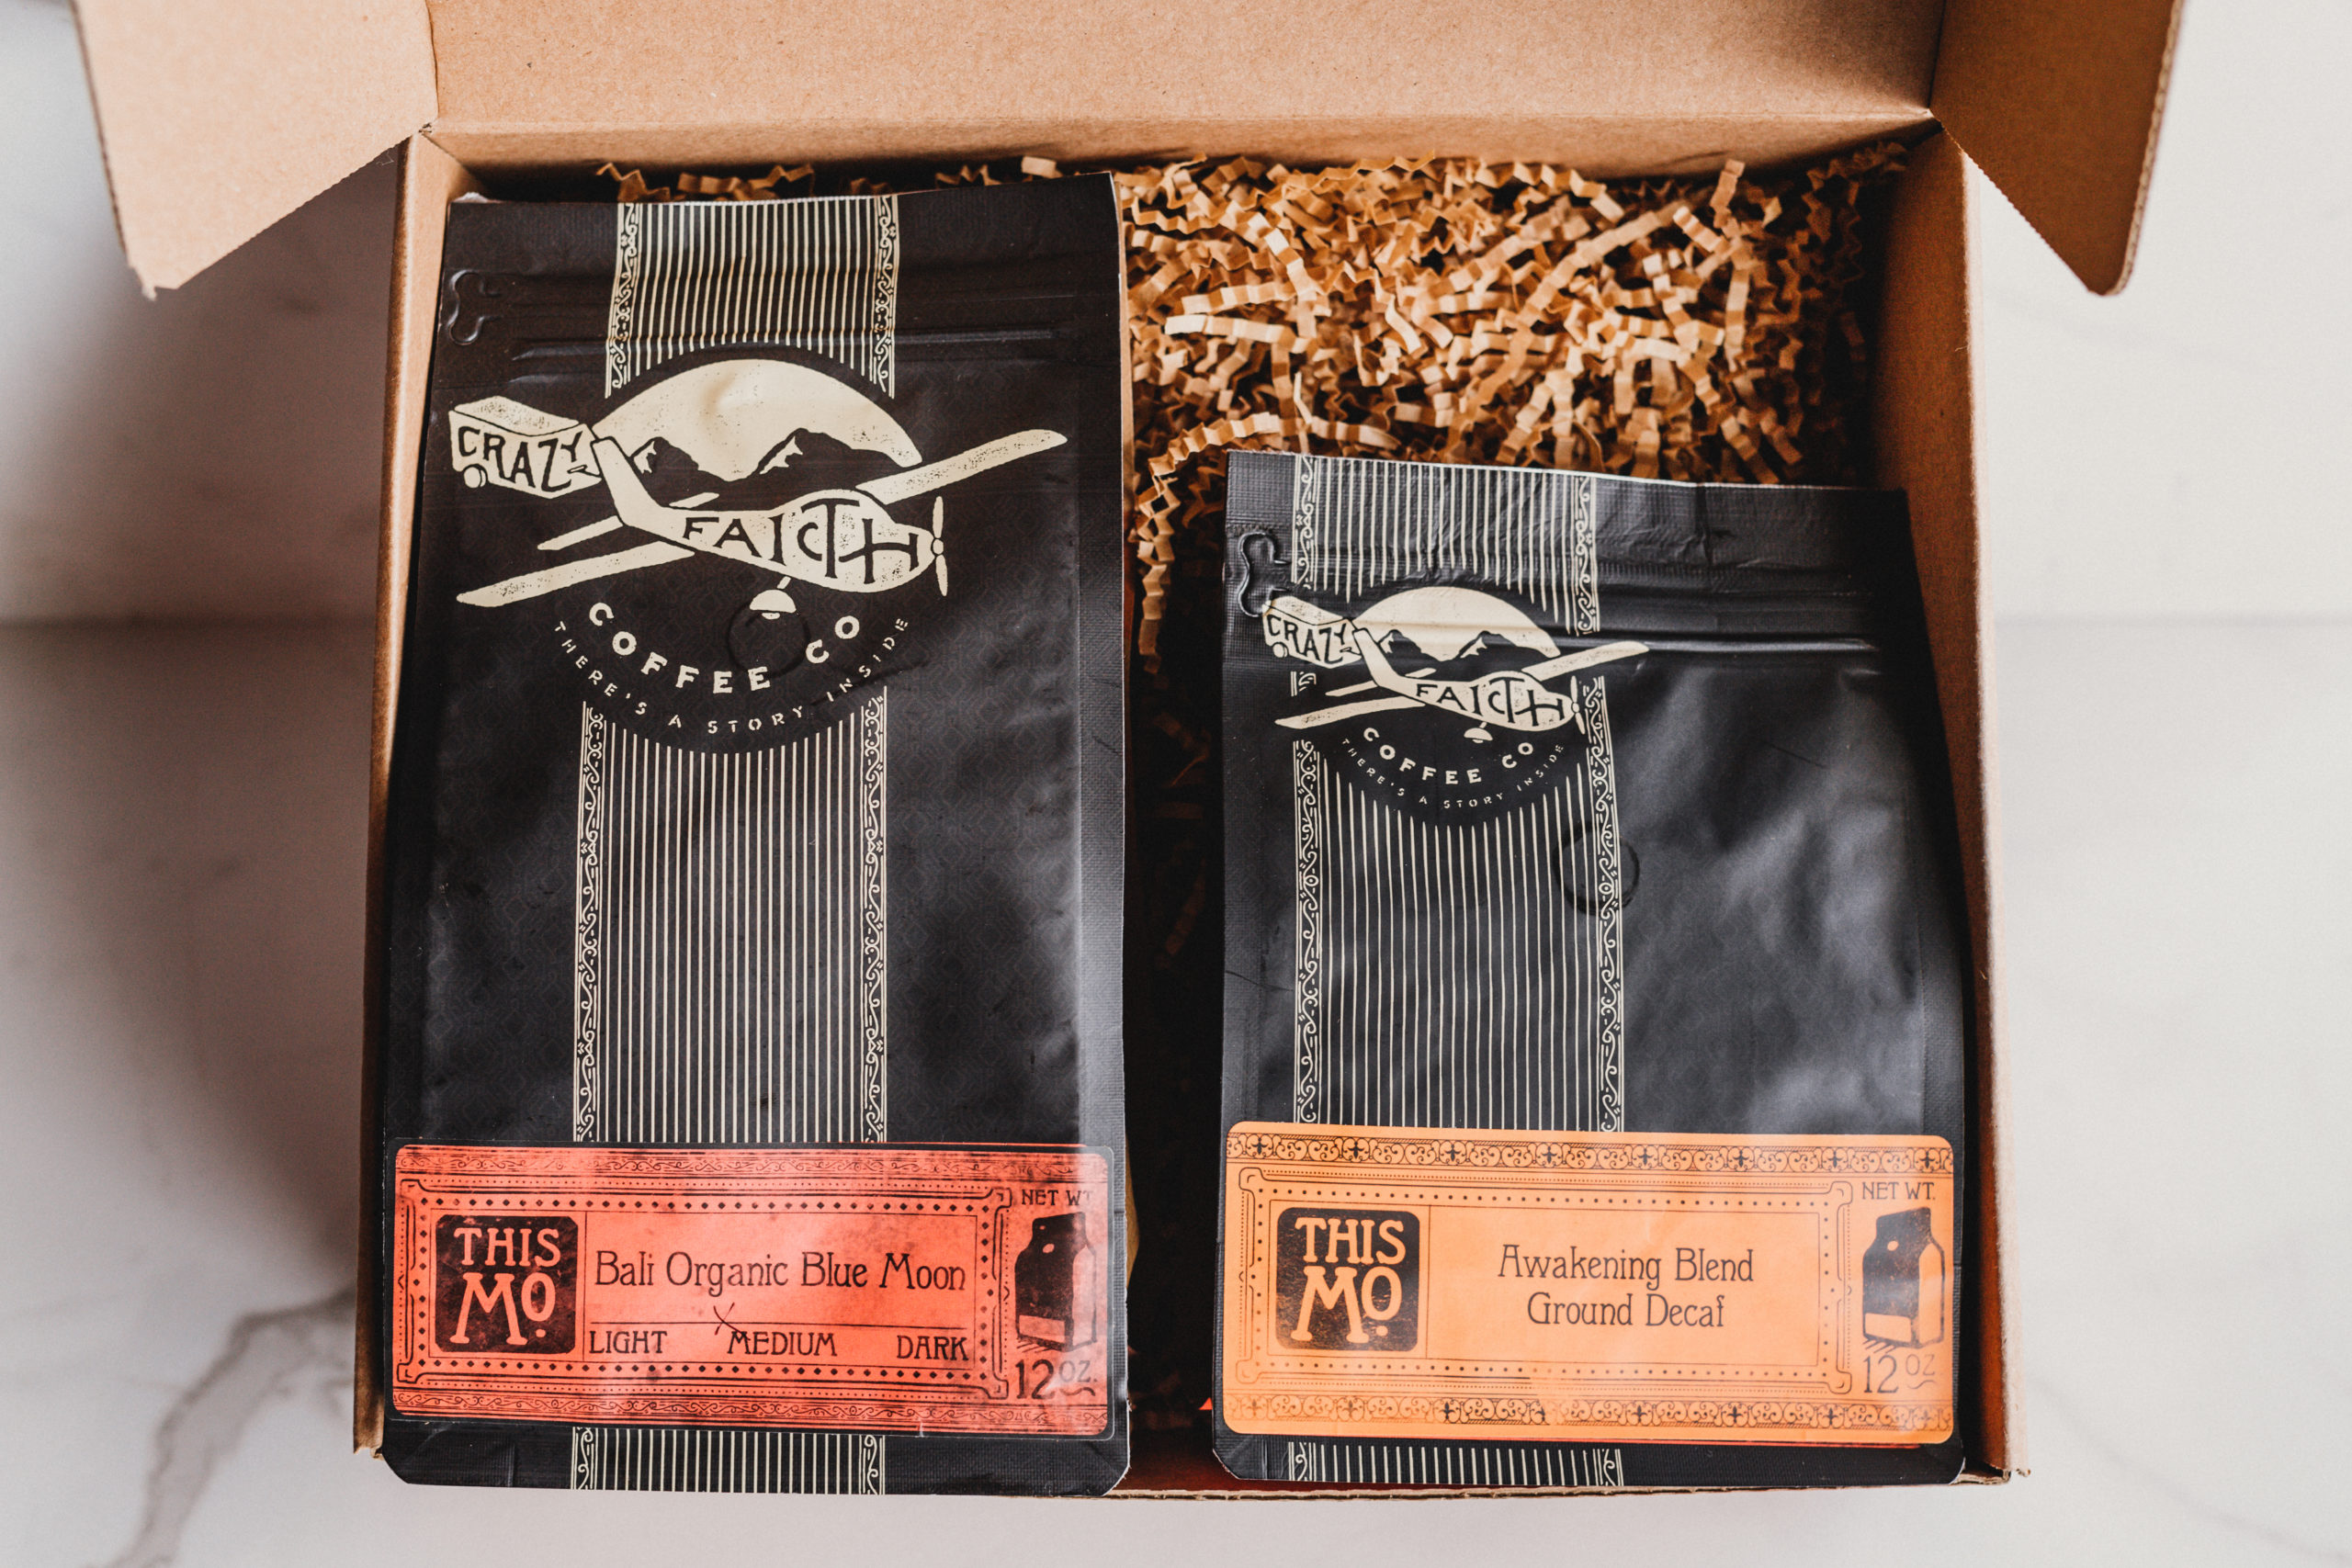 Packages of Bali Organic Blue Moon and Awakening Blend Groud Decaf coffee beans in a box